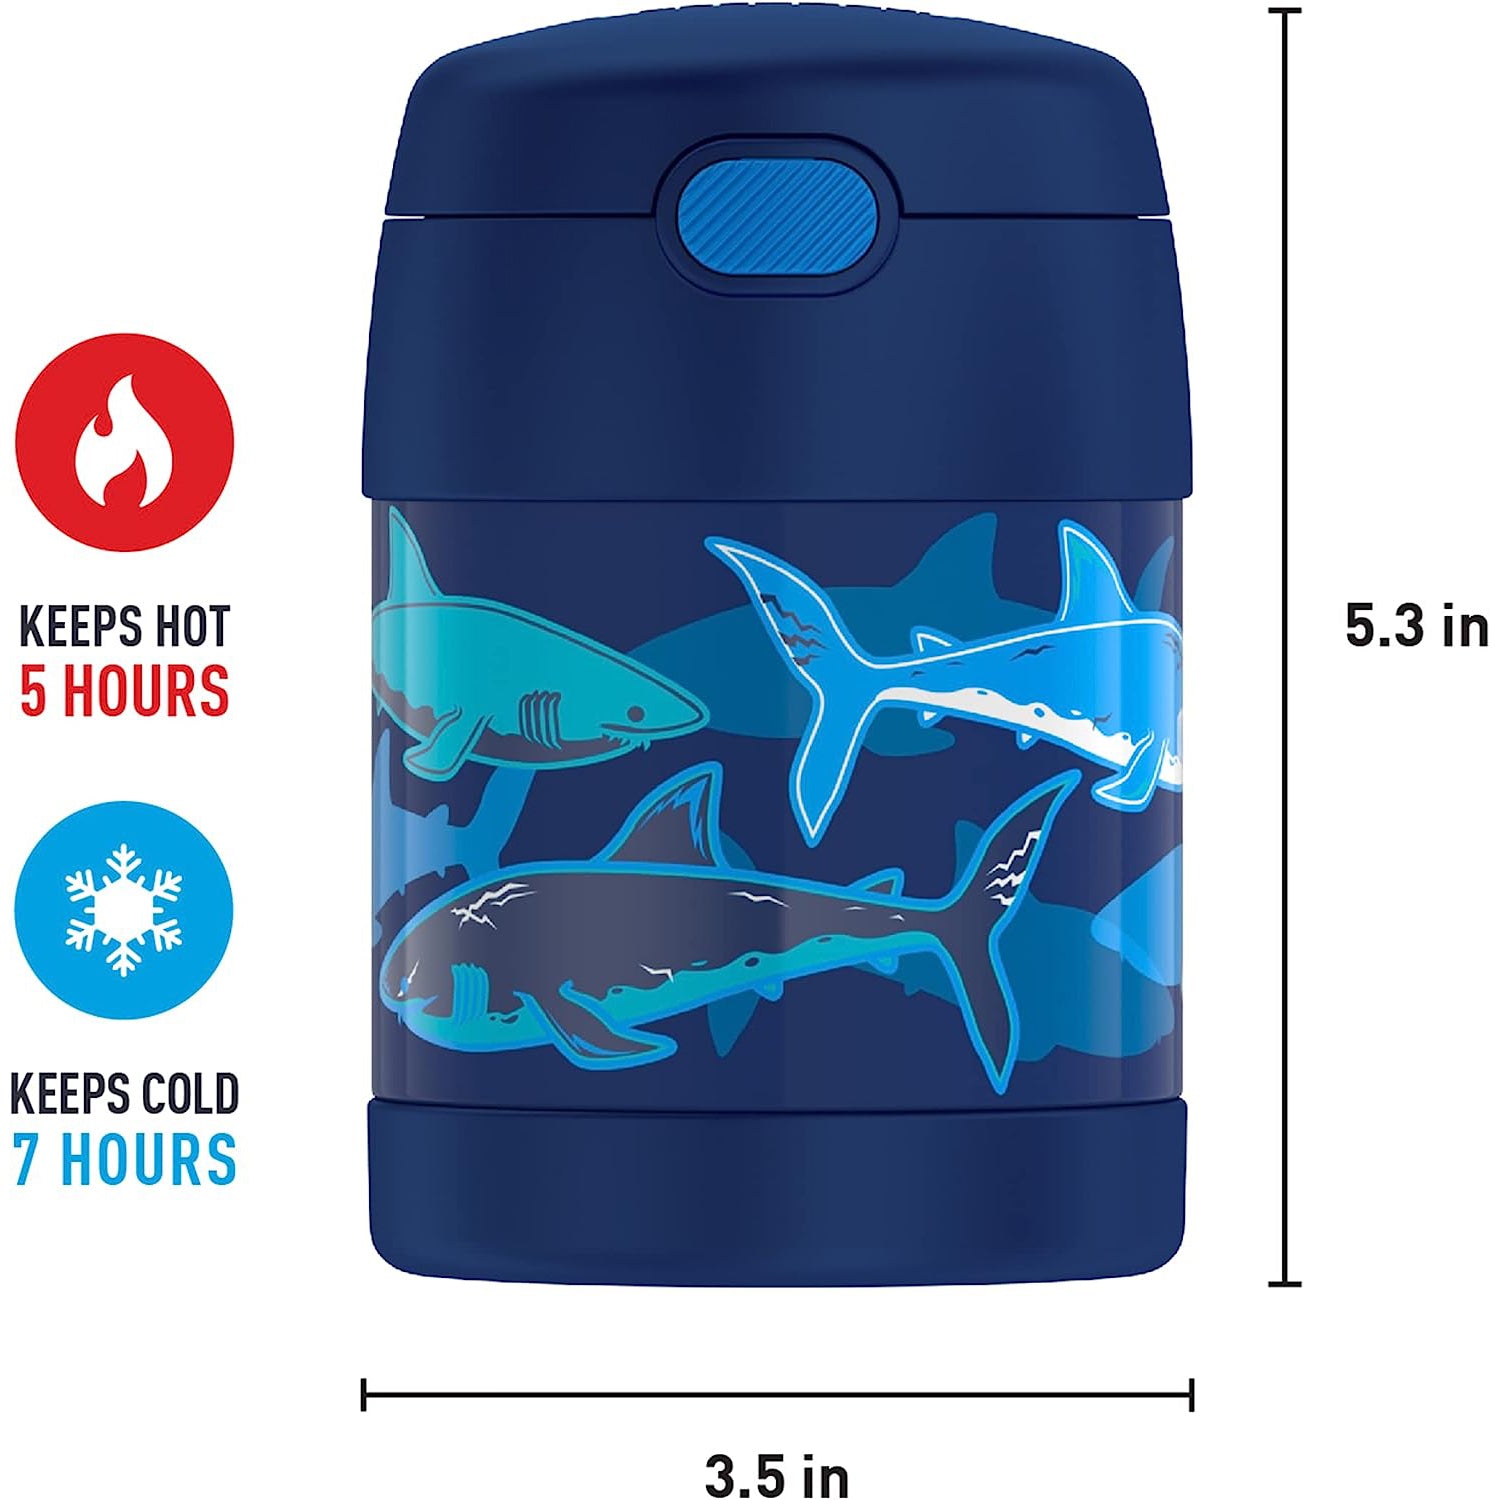 Thermos 12 oz. Kid's Funtainer Insulated Water Bottle - Dinosaur Kingdom 